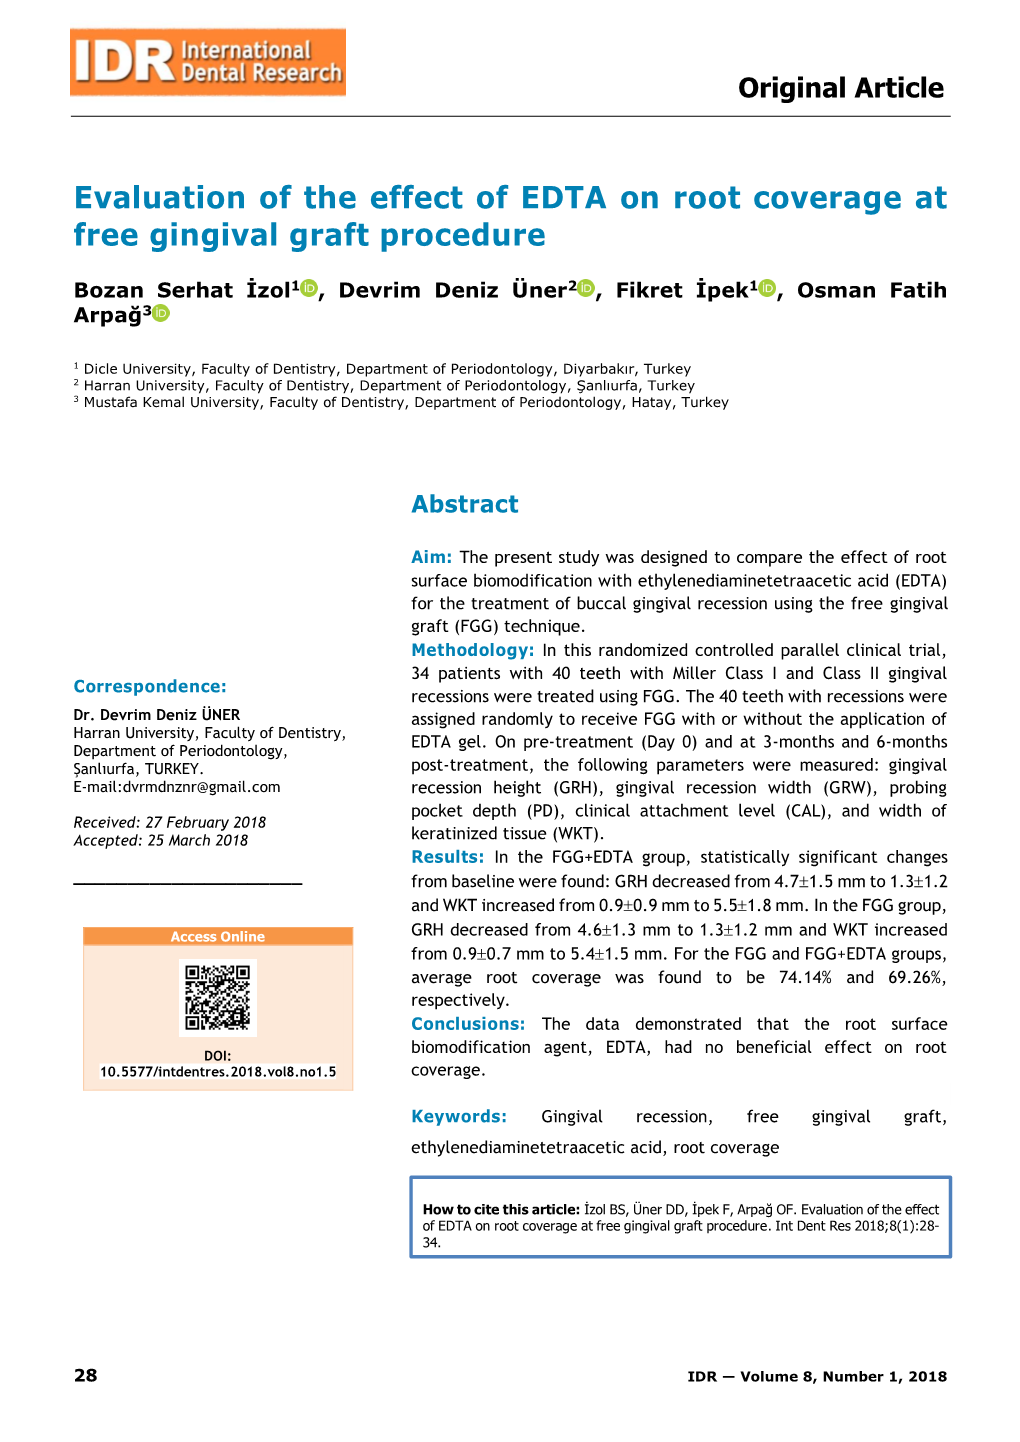 Evaluation of the Effect of EDTA on Root Coverage at Free Gingival Graft Procedure